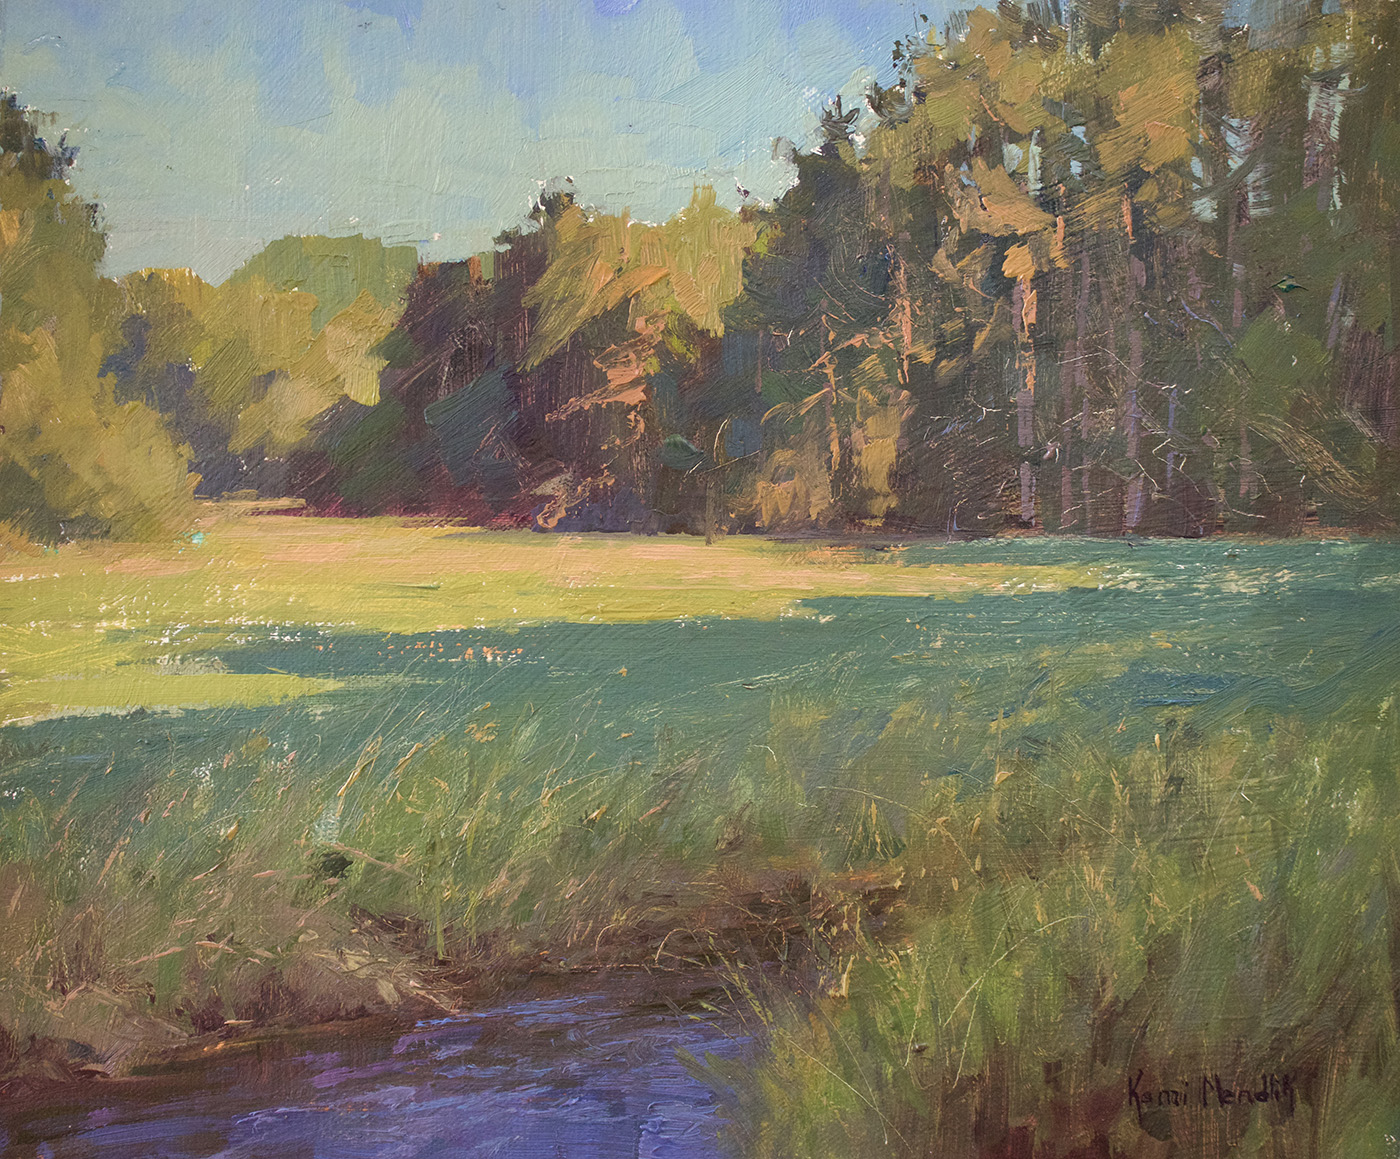 oil painting of field with slip of river flowing through in the foreground